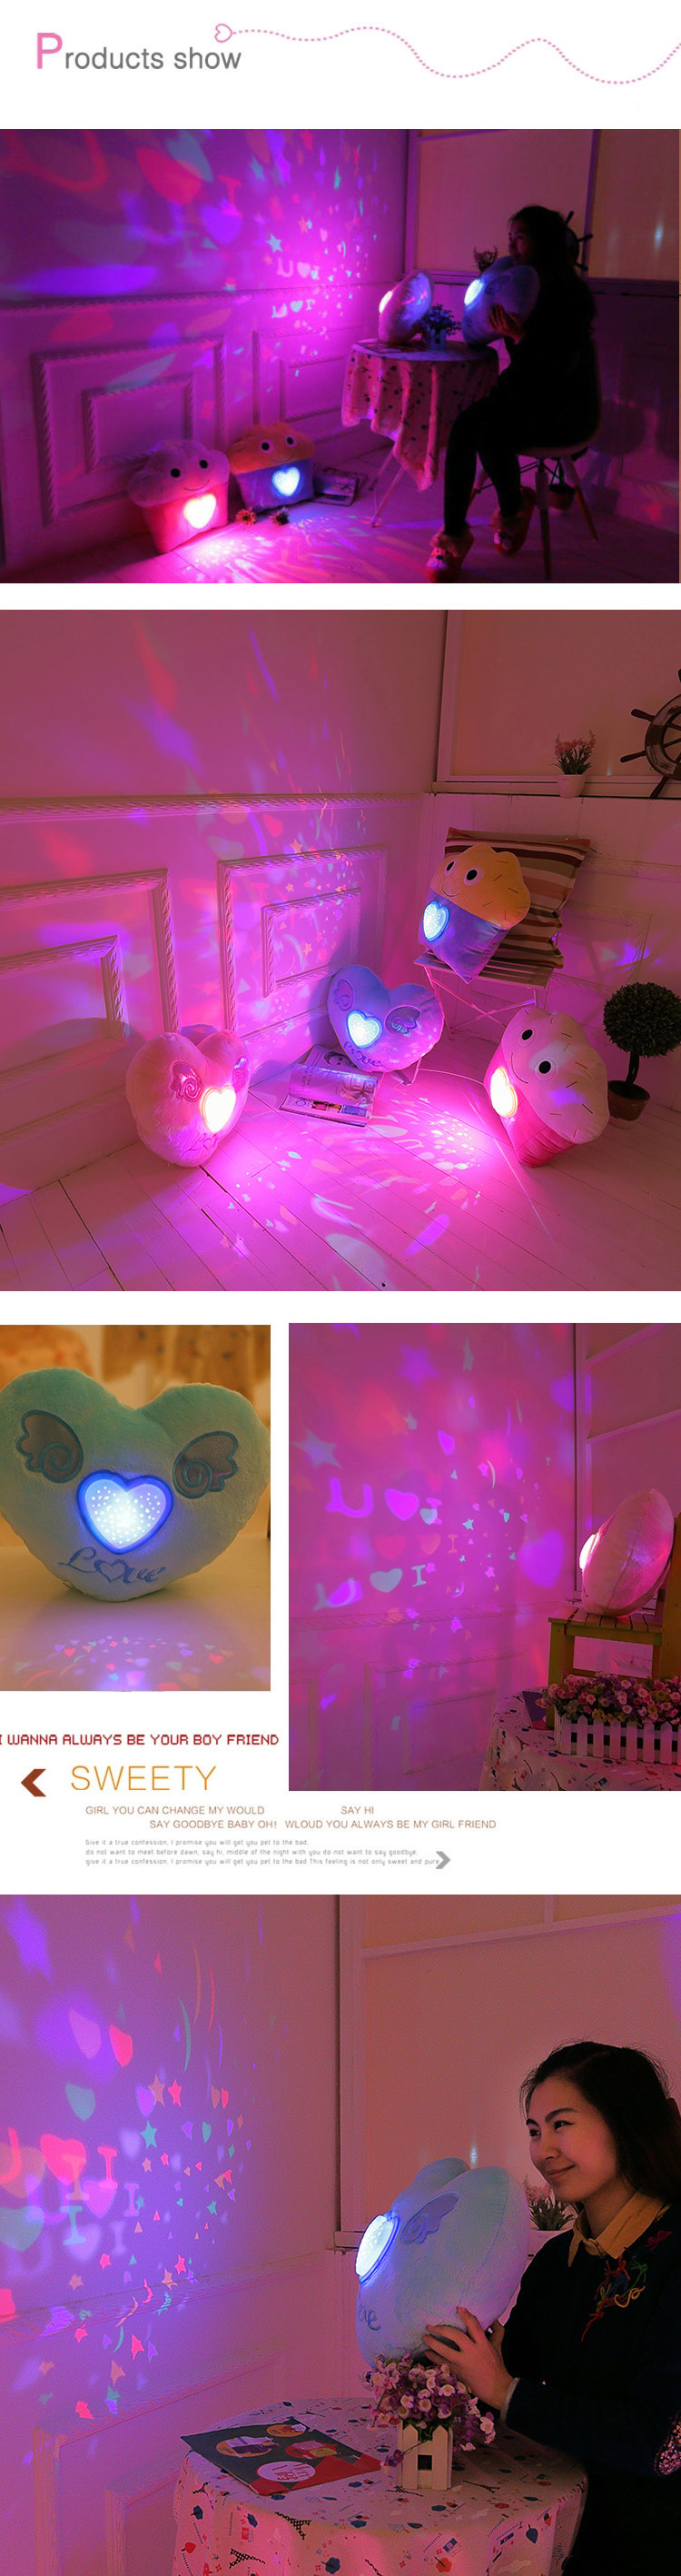 Colorful-Plush-LED-Music-Projection-Star-Cake-Heart-Shape-Throw-Pillow-Home-Sofa-Decor-Valentine-Gif-1023125-2